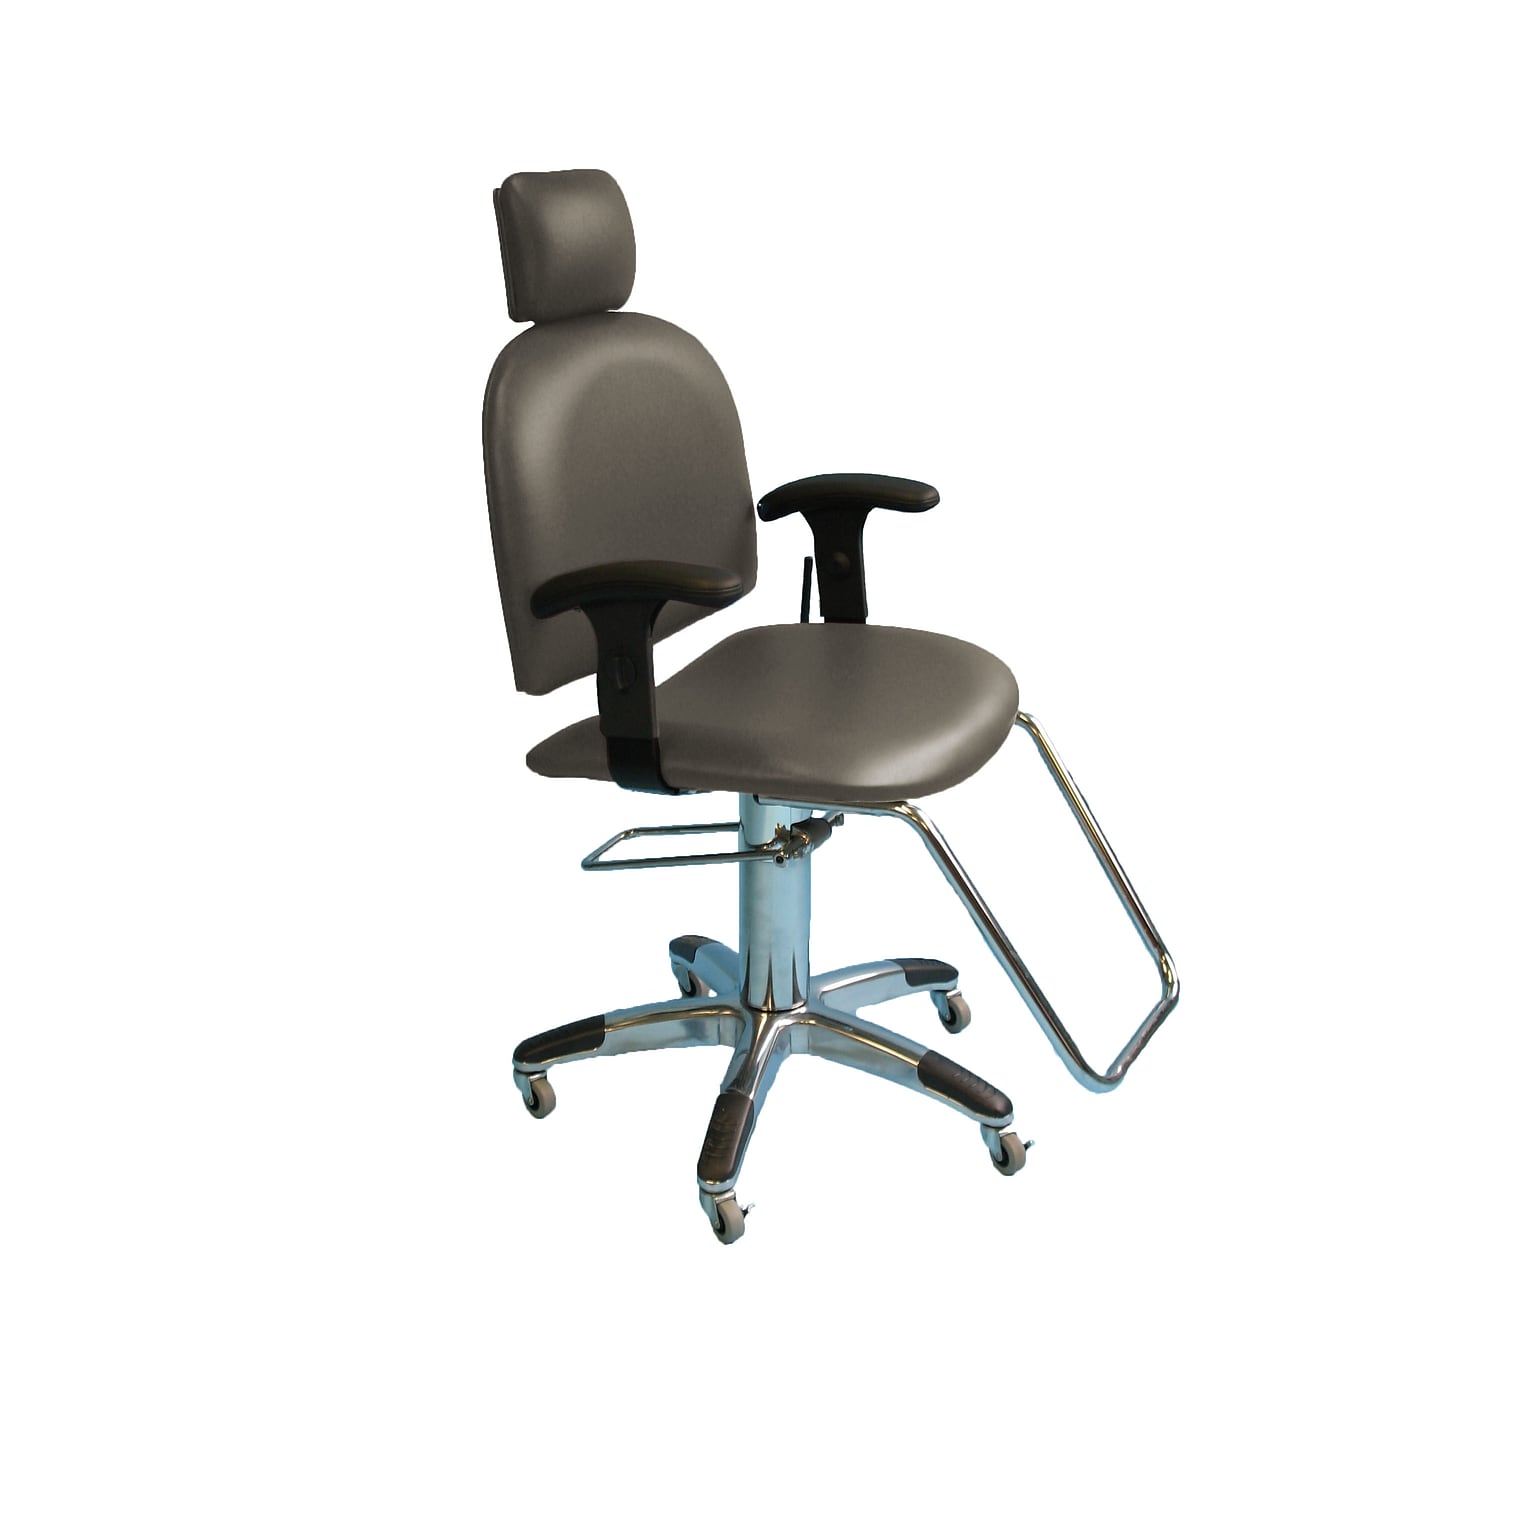 Brandt Mammography/Treatment Chair, Charcoal (23110Charcoal)